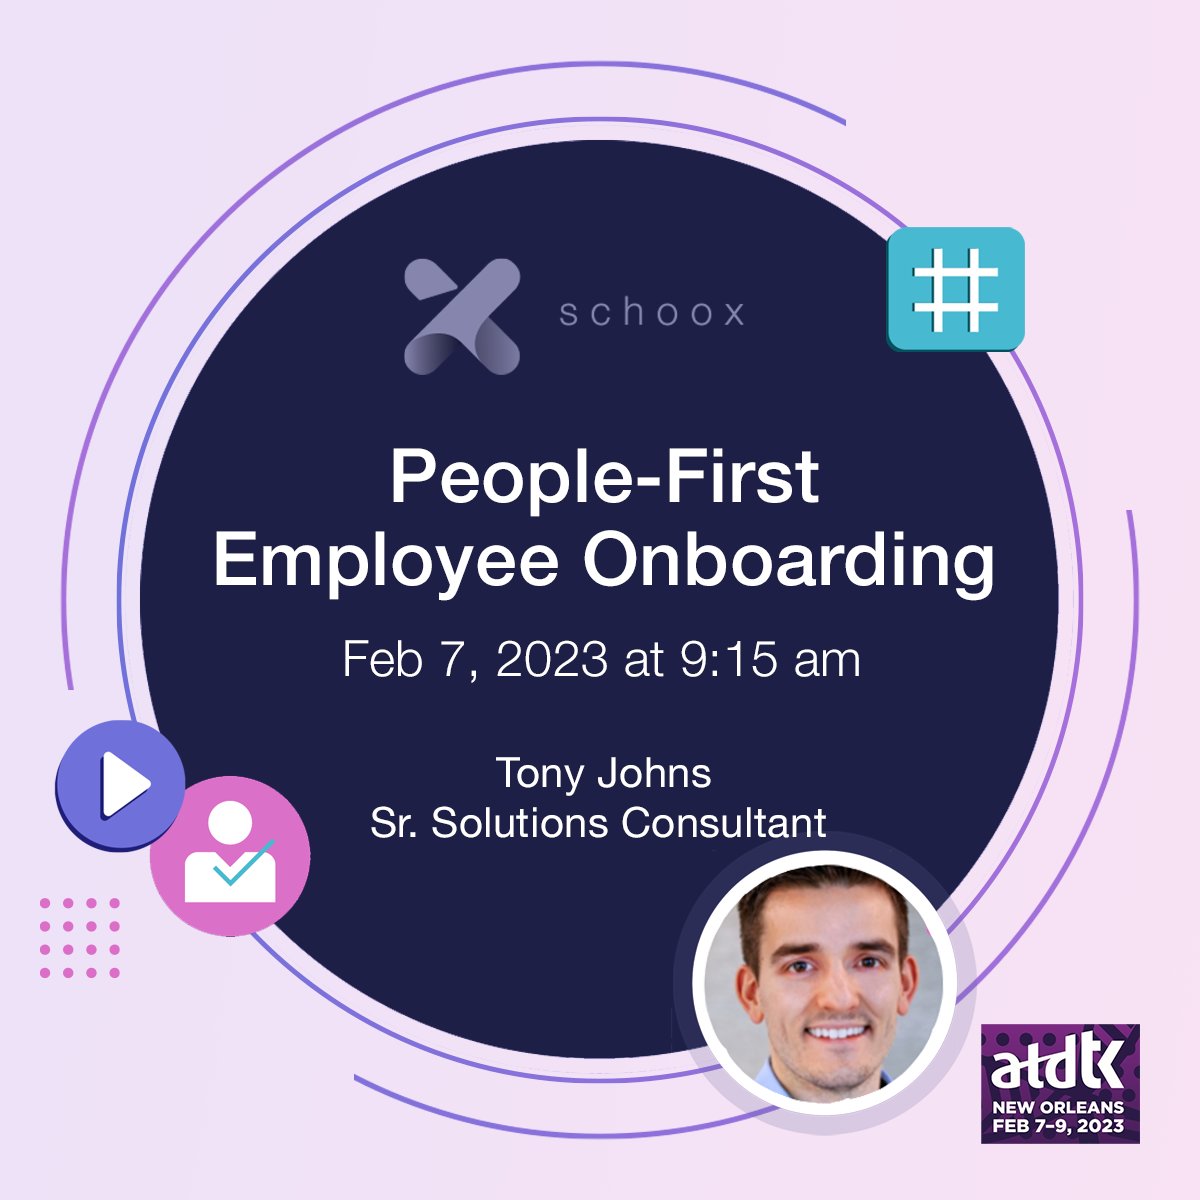 First impressions count. In this session, you’ll explore tools in Schoox’s learning and development platform to help organizations set new employees up for success while providing leaders insights into their progress and business impact. See you there!